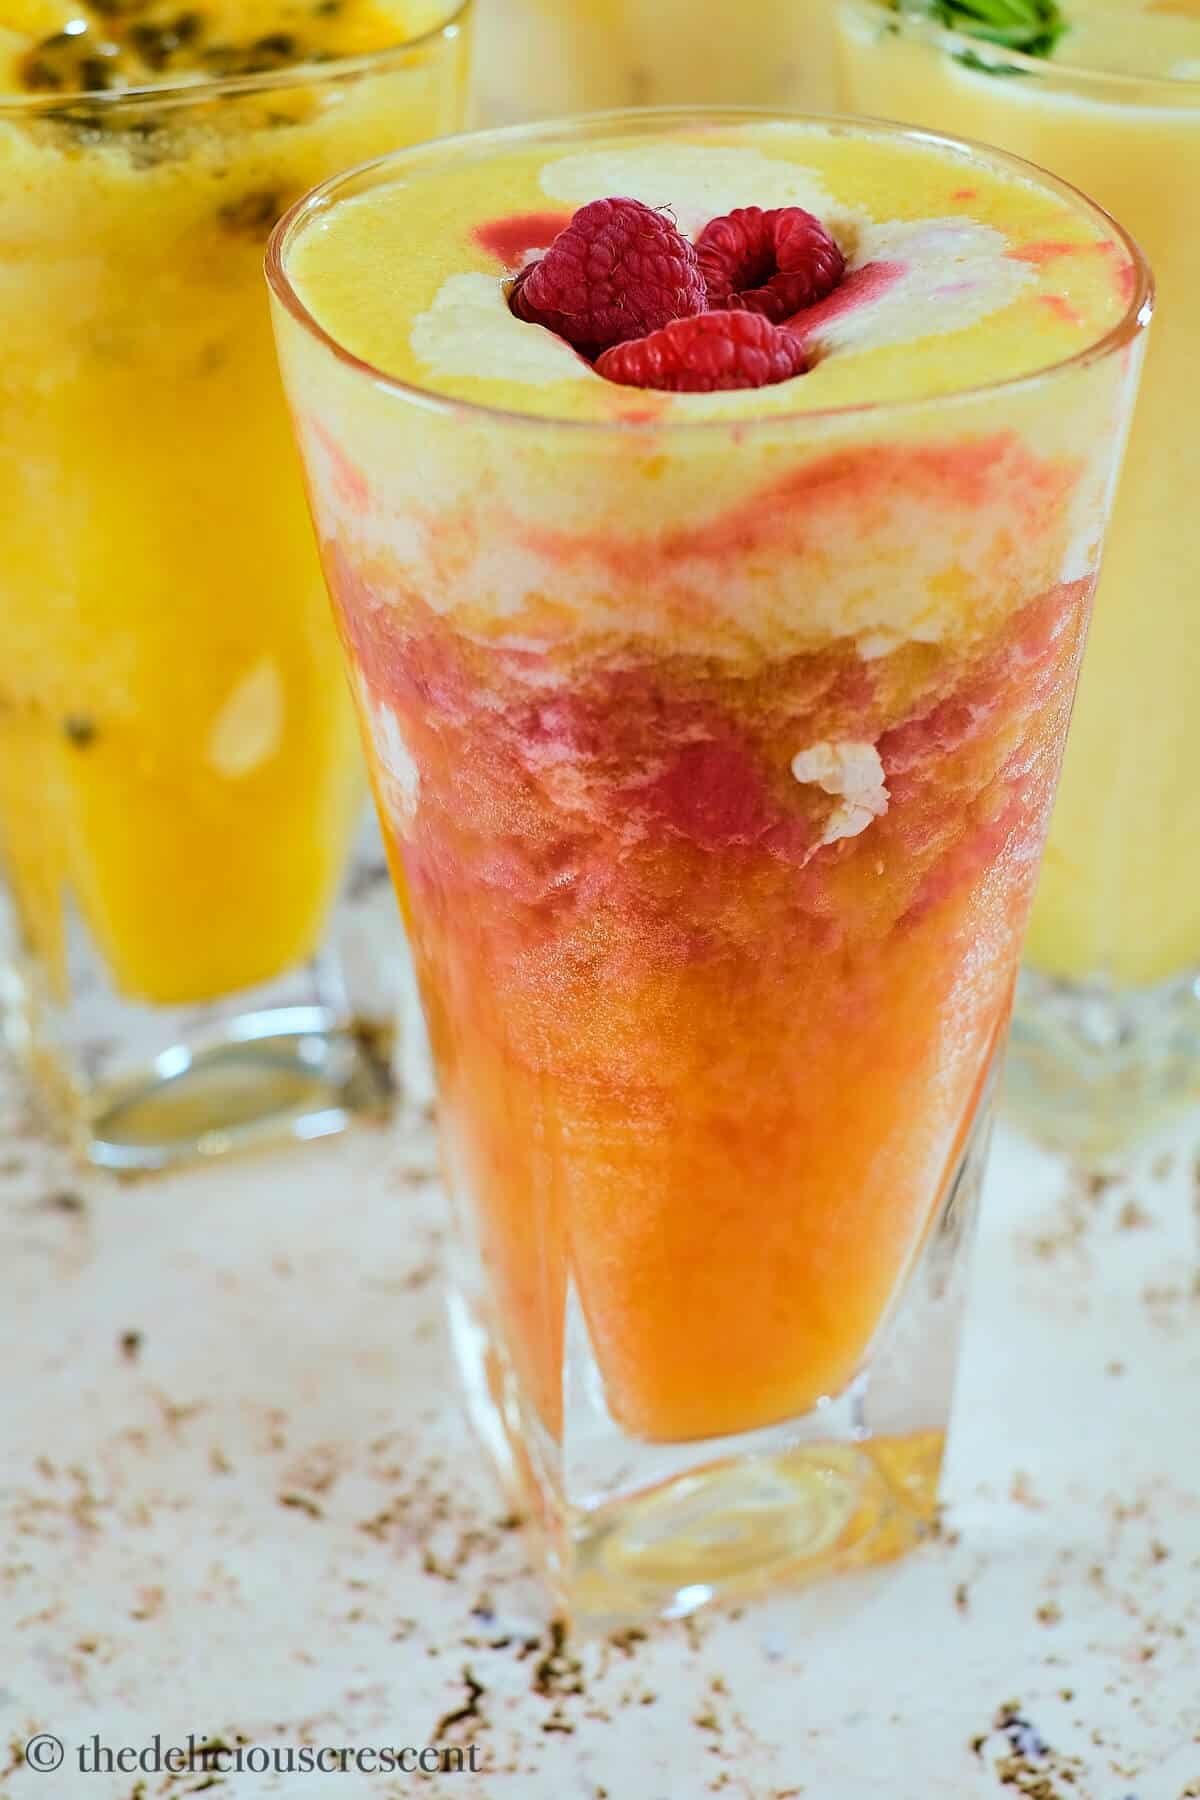 Colorful fruit beverage in a tall glass.